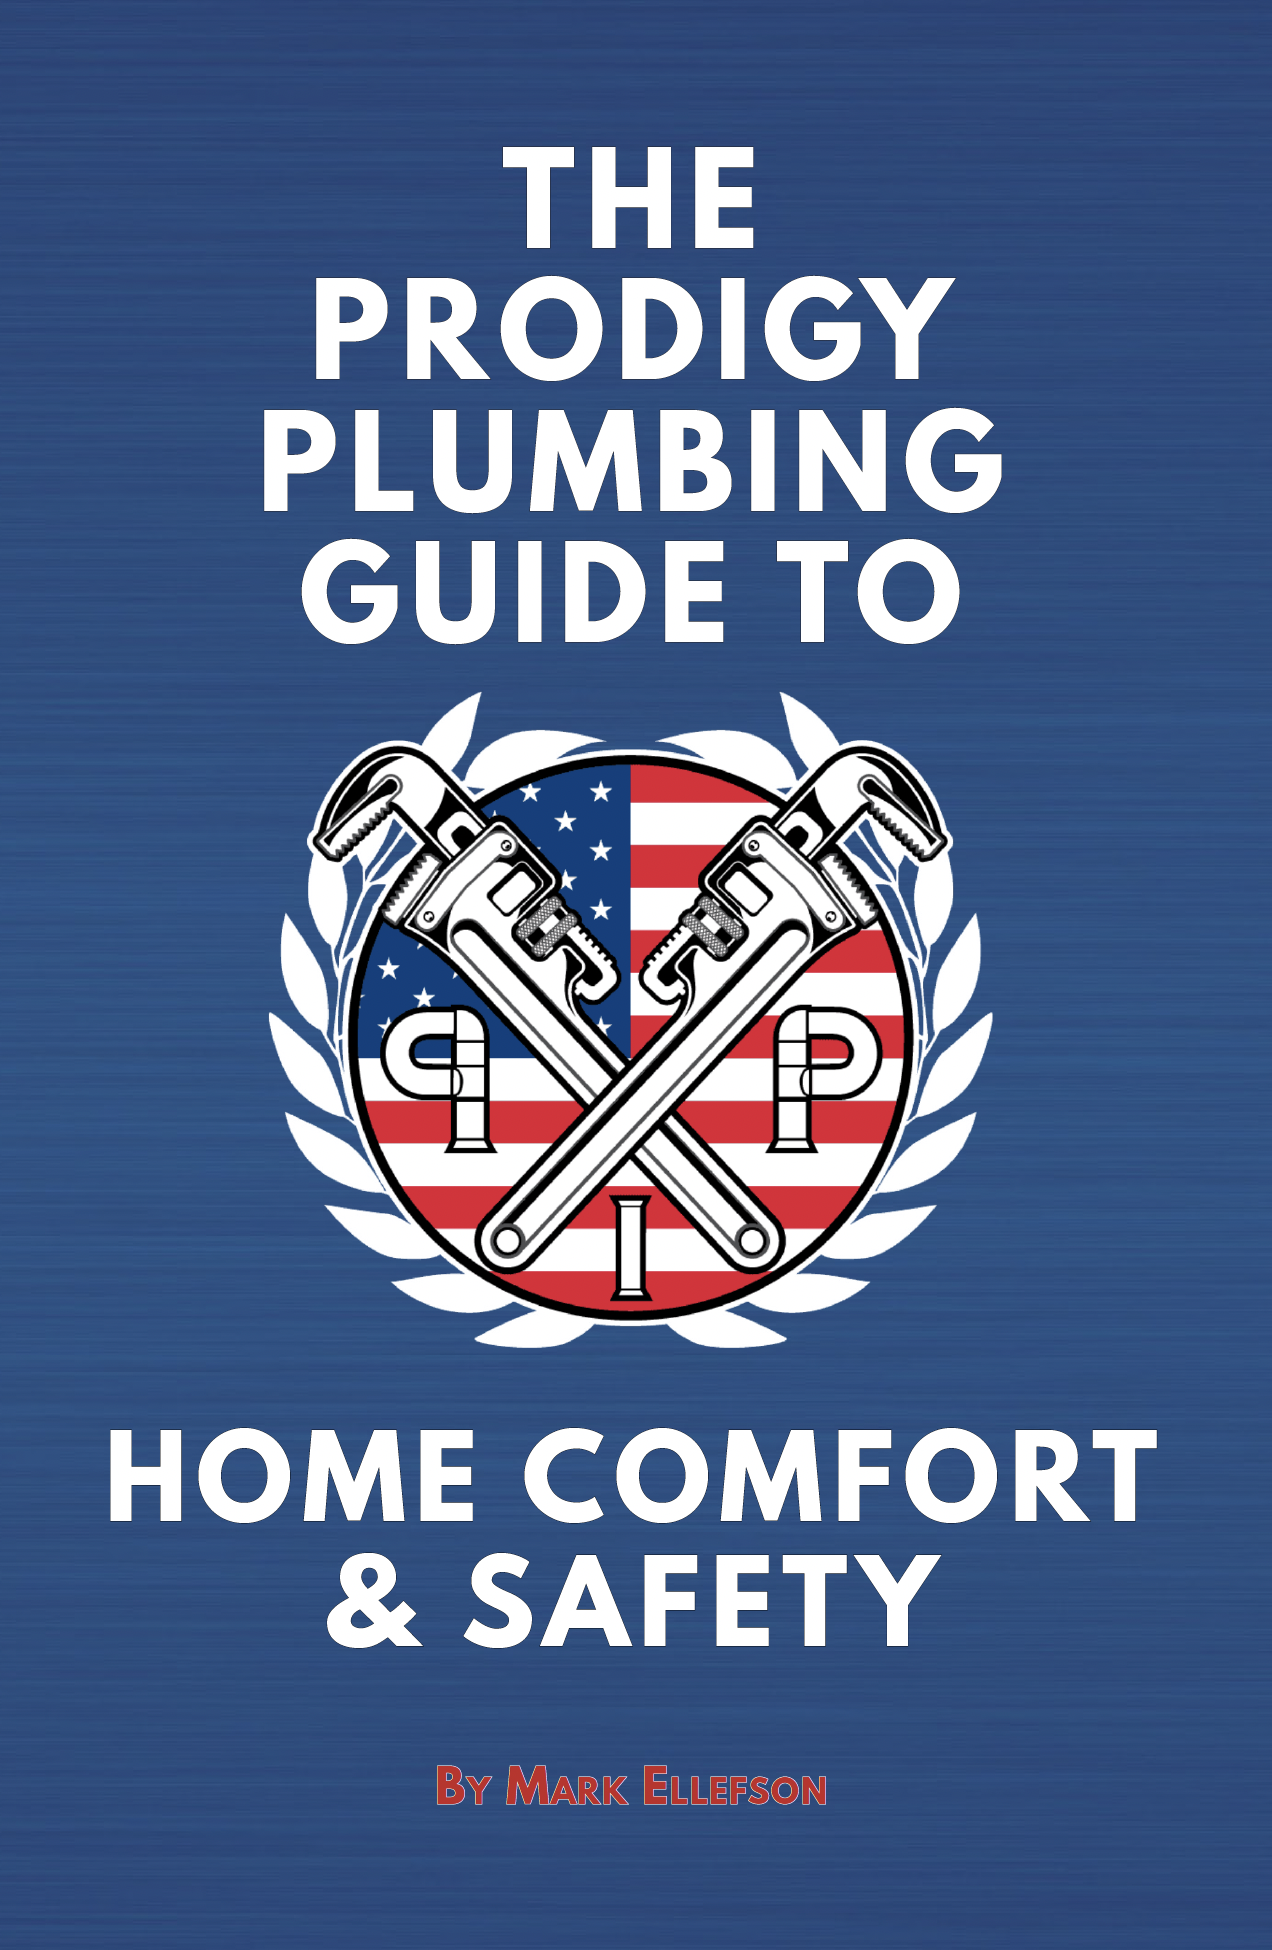 The Prodigy Plumbing Guide to Home Comfort & Safety